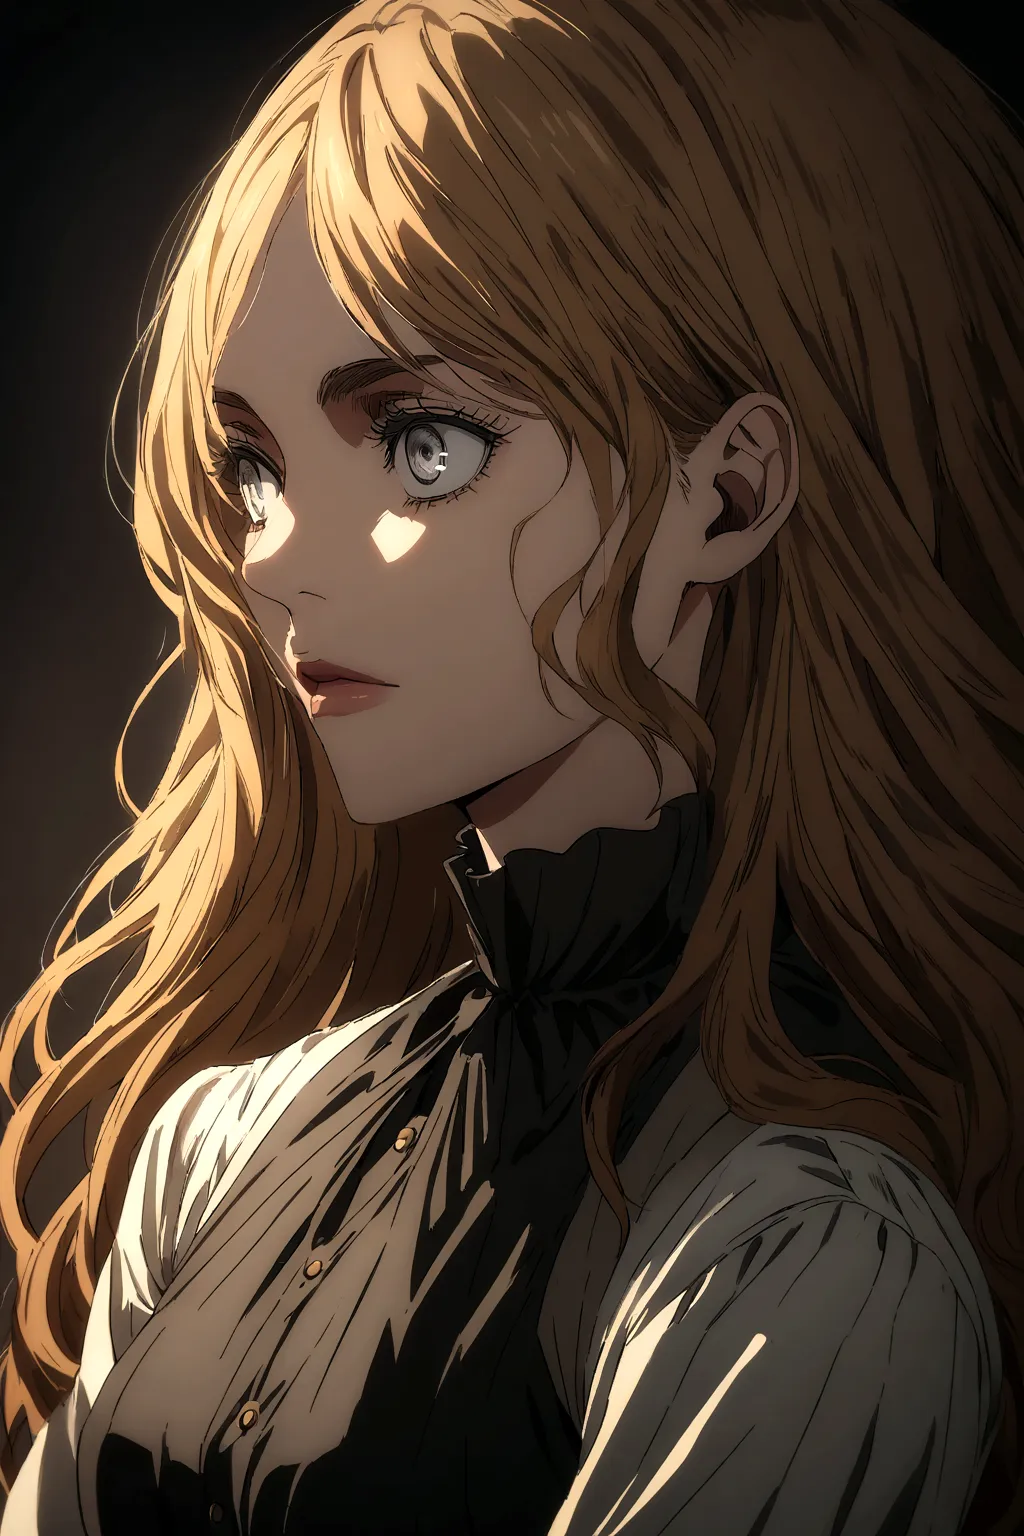 Attack on Titan anime style, woman with ginger wavy long hair, grey eyes. She wears a black high-necked blouse